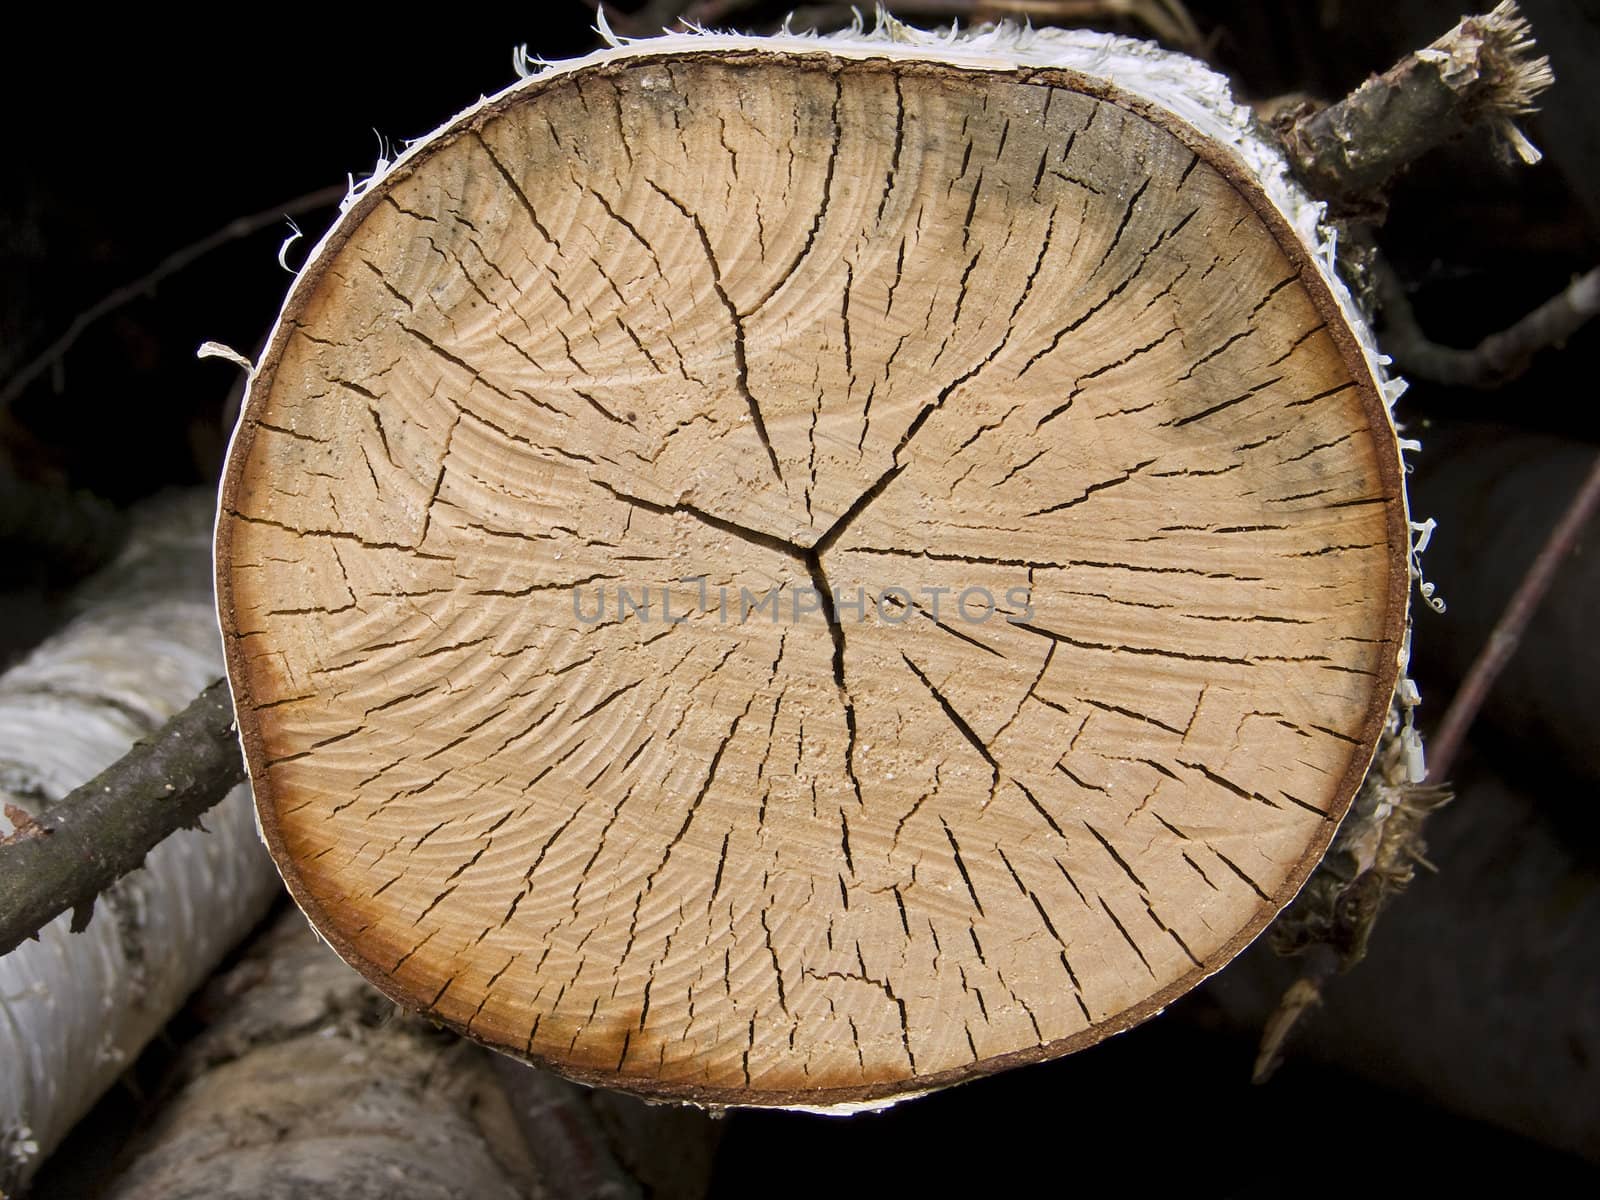 Cross section of a tree with annual rings